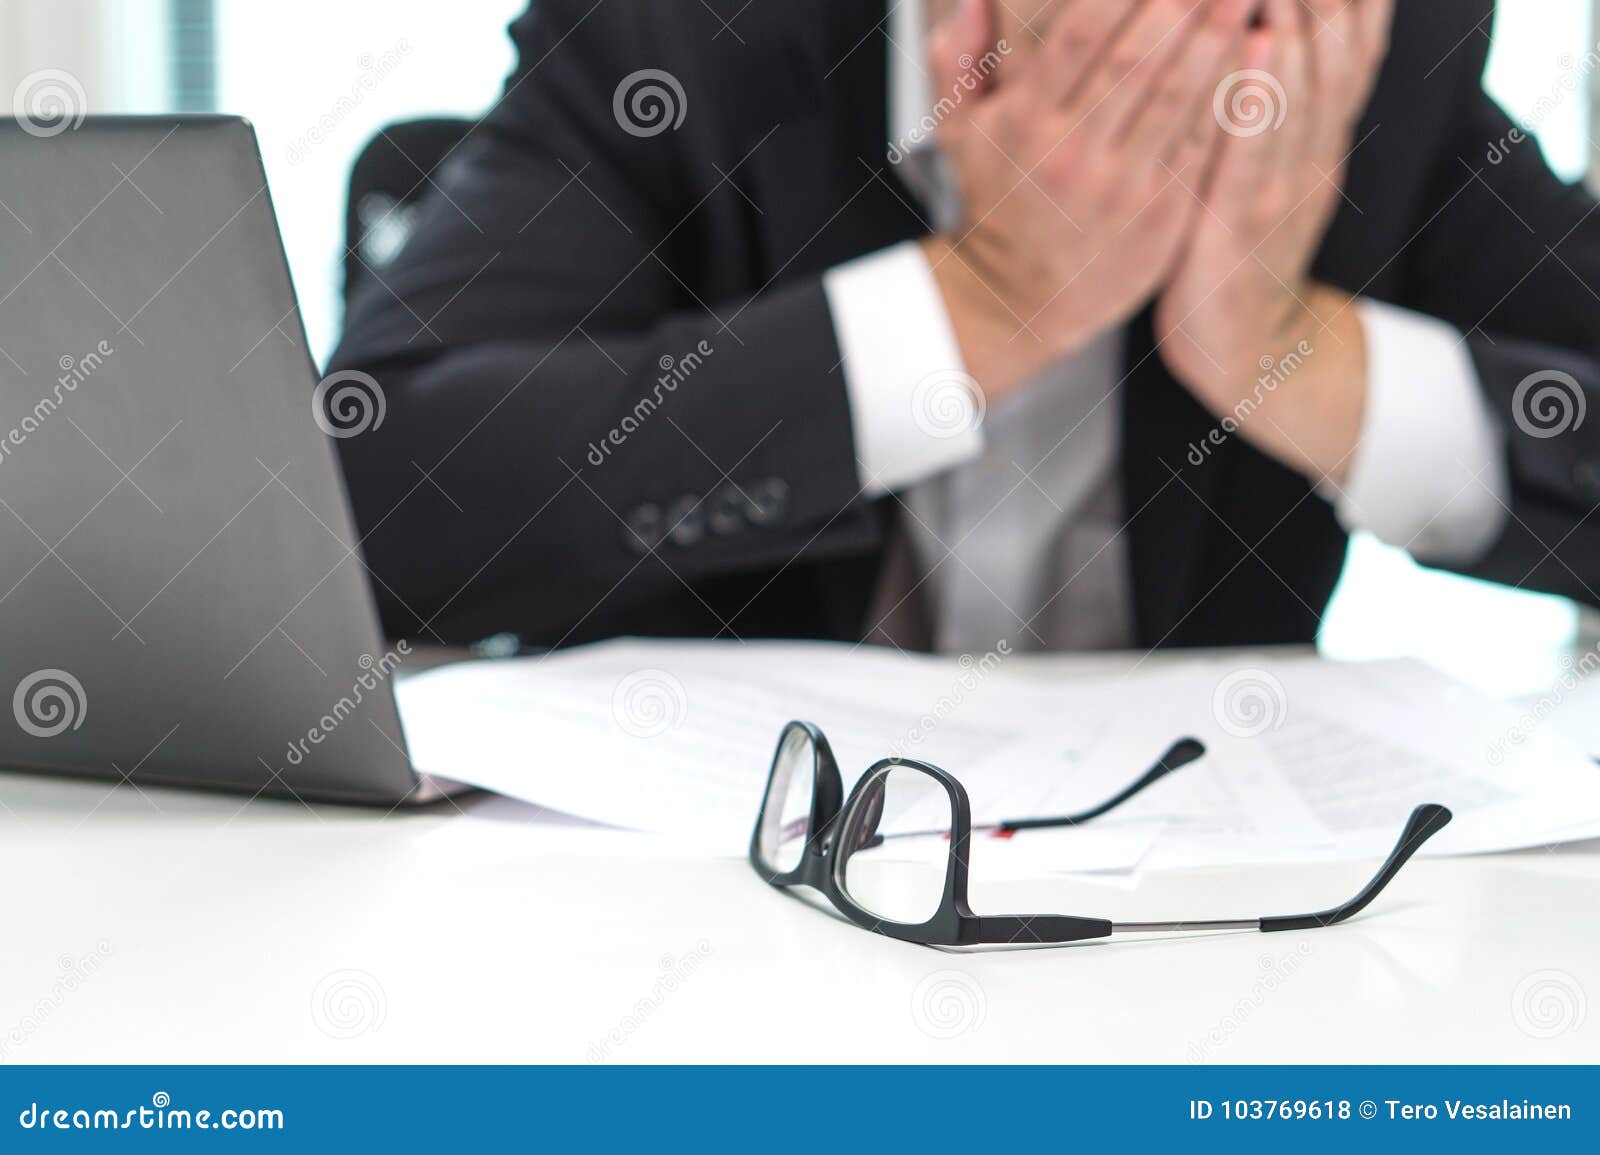 stressed business man covering face with hands in office.